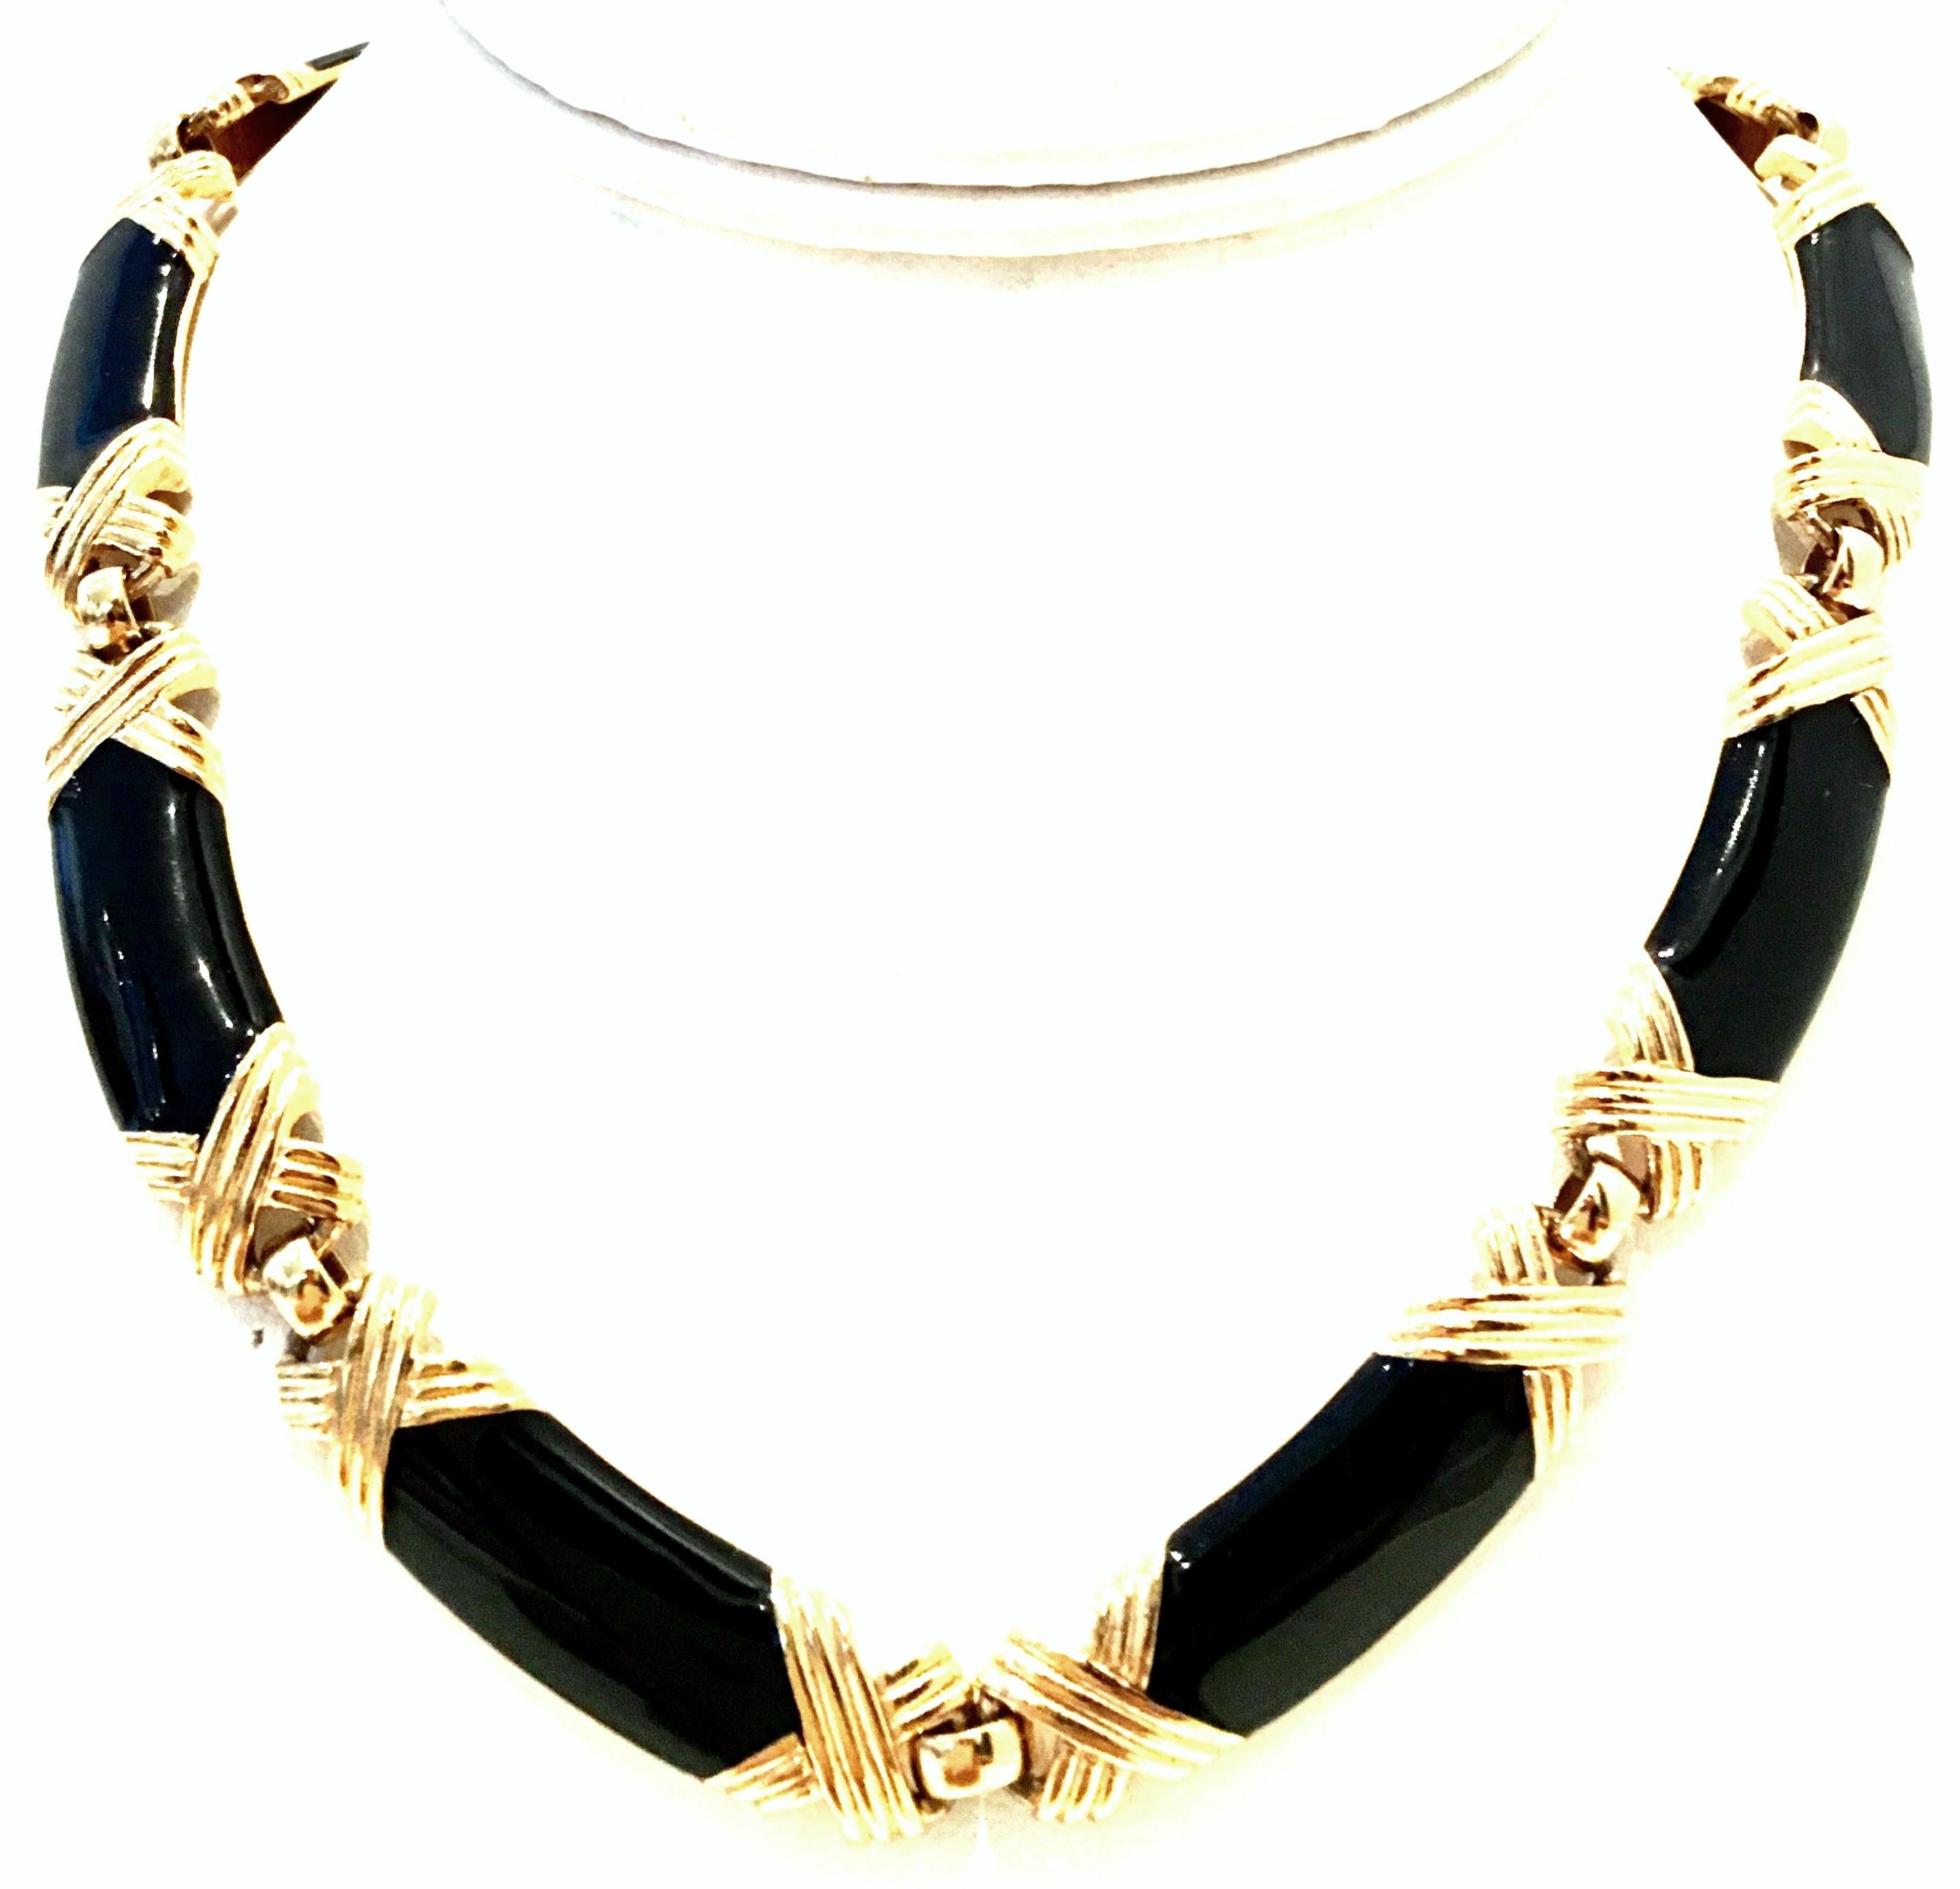 20th Century Gold Plate & Black Enamel Chain Link Choker Style Necklace By, Monet.  Features an 